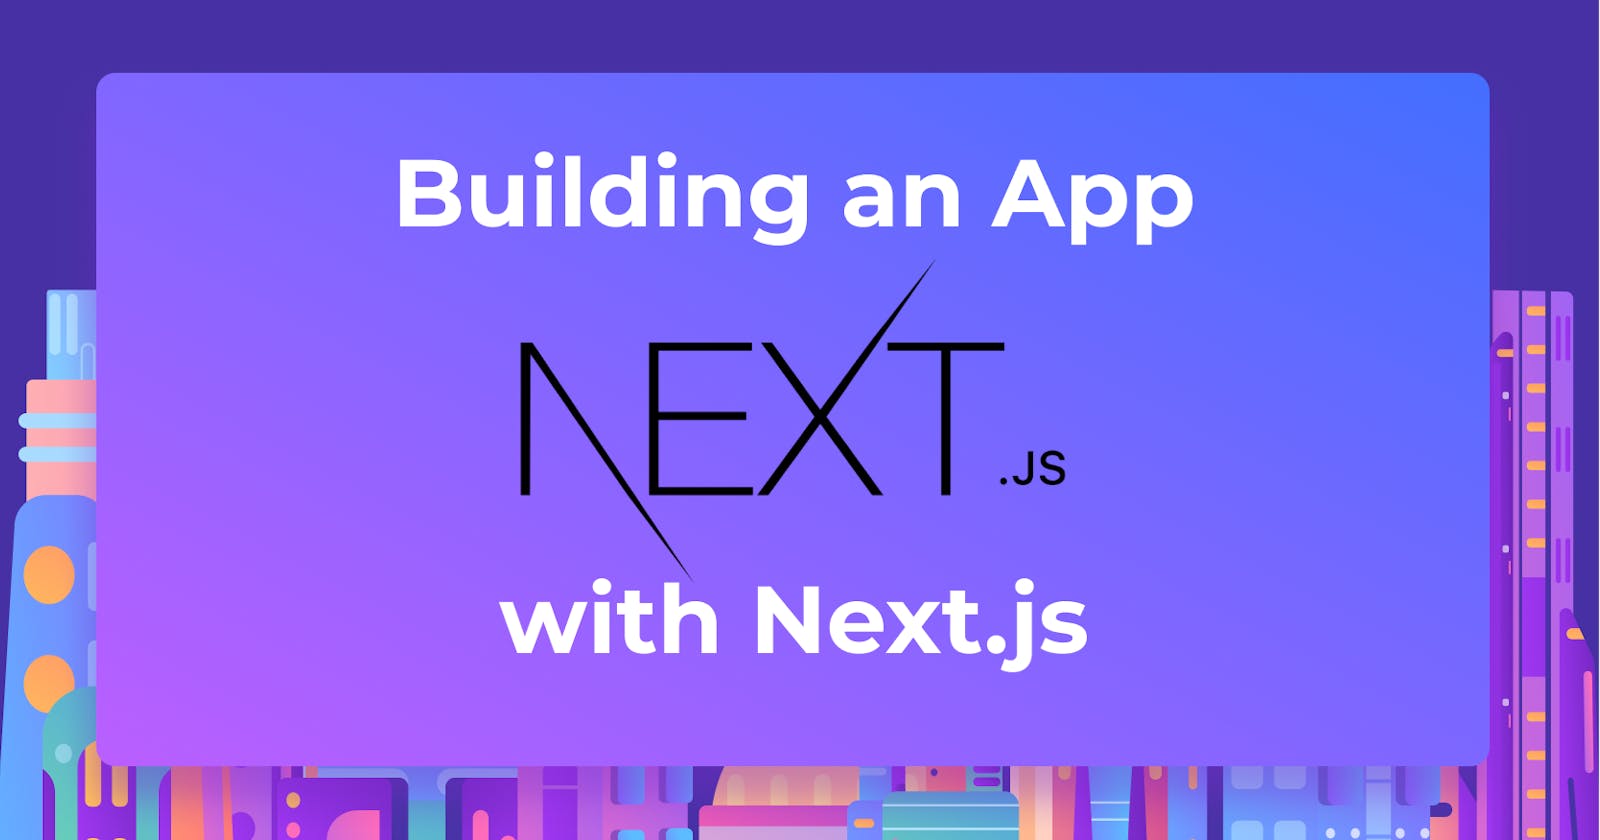 How to Build a Full-stack App with Next.js, Prisma, Postgres, and Fastify